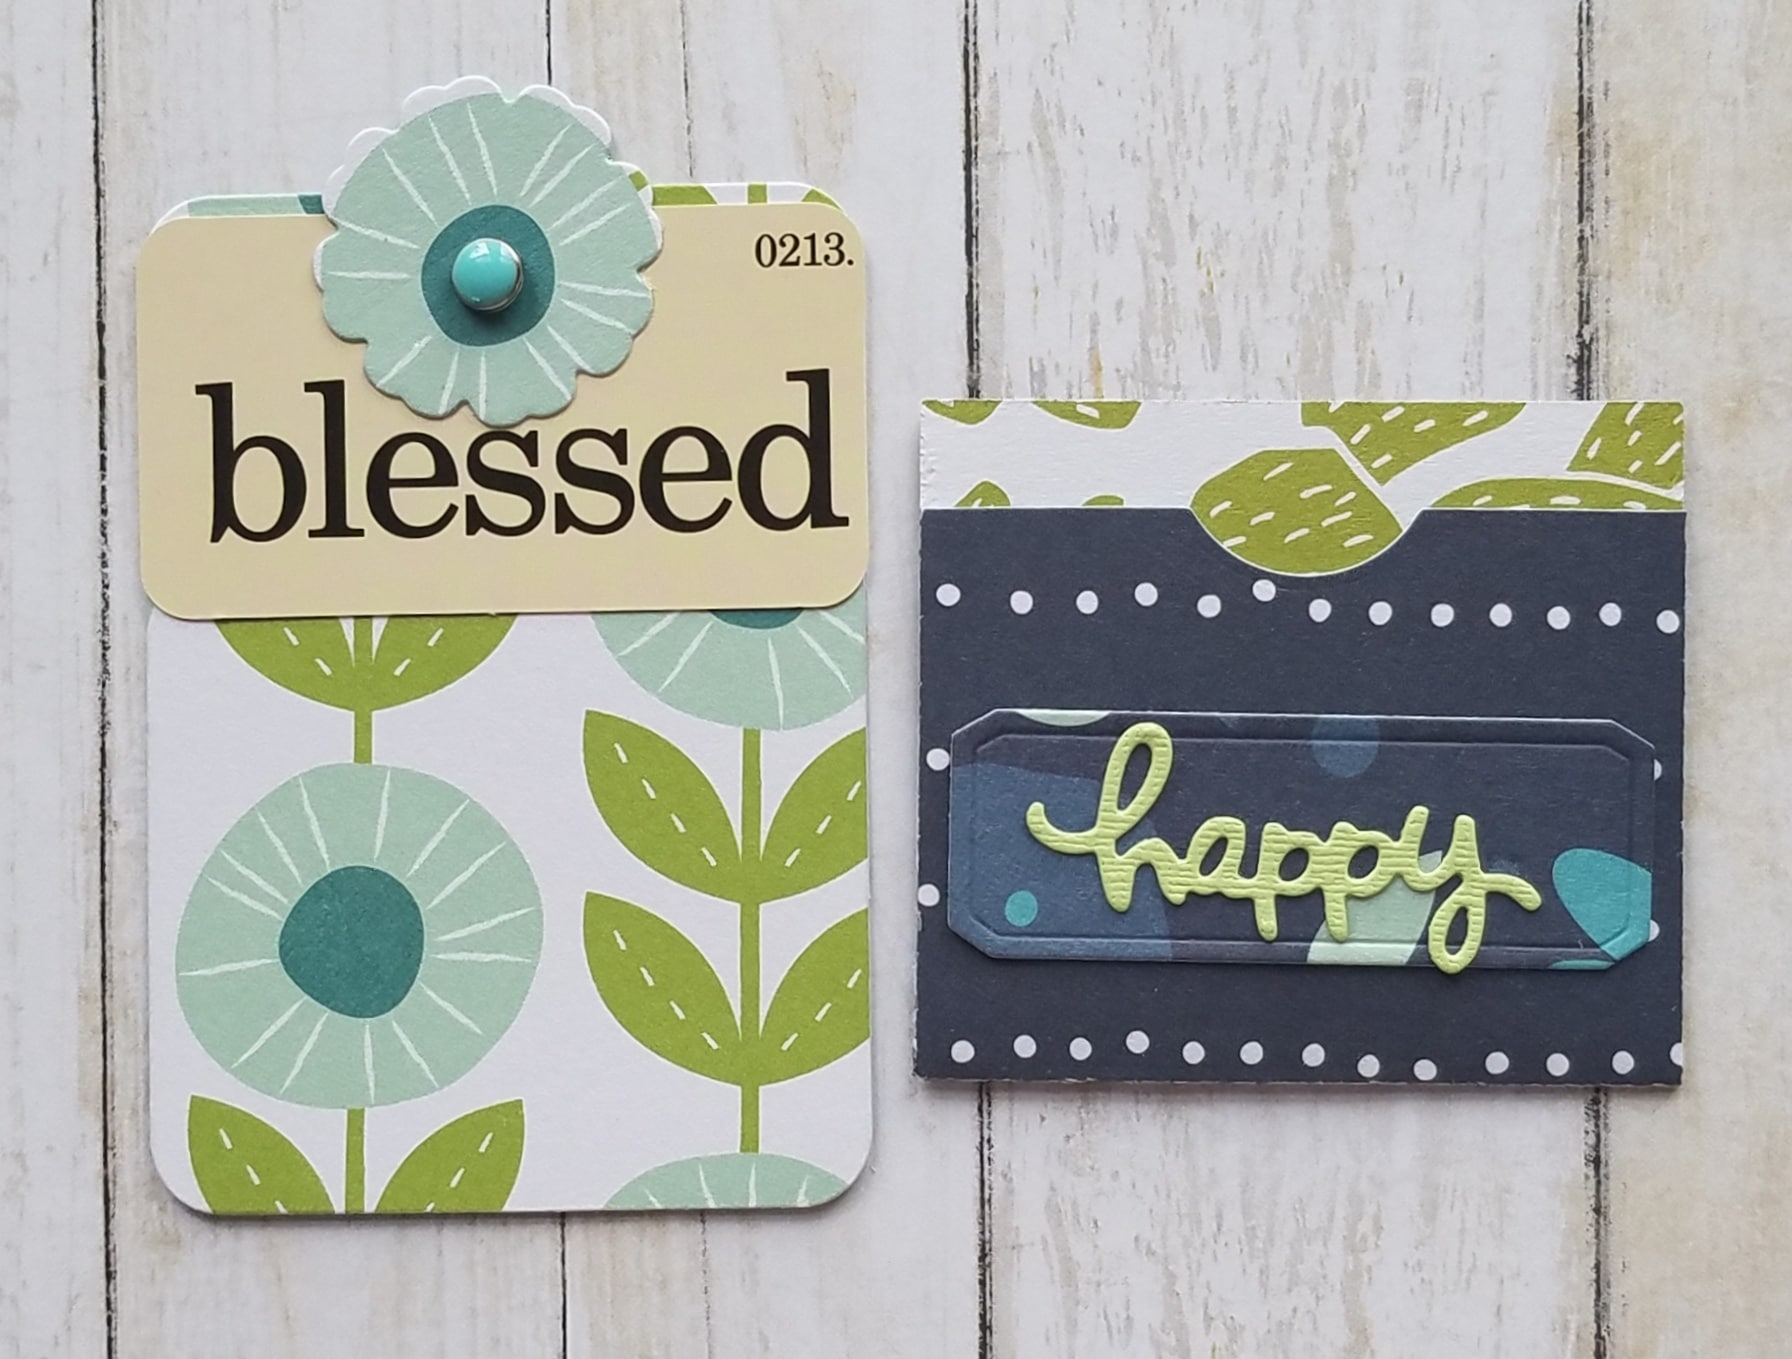 ScrapbookingStore May 2019 kit - Our Design Team members used all crafting materials from our May 2019 monthly kit called "Happy Days" collection by My Mind’s Eye, which also includes Dear Lizzy “Oh Hello” from the Lovely Day collection and Maggie Holmes “Summertime” from the Carousel collection